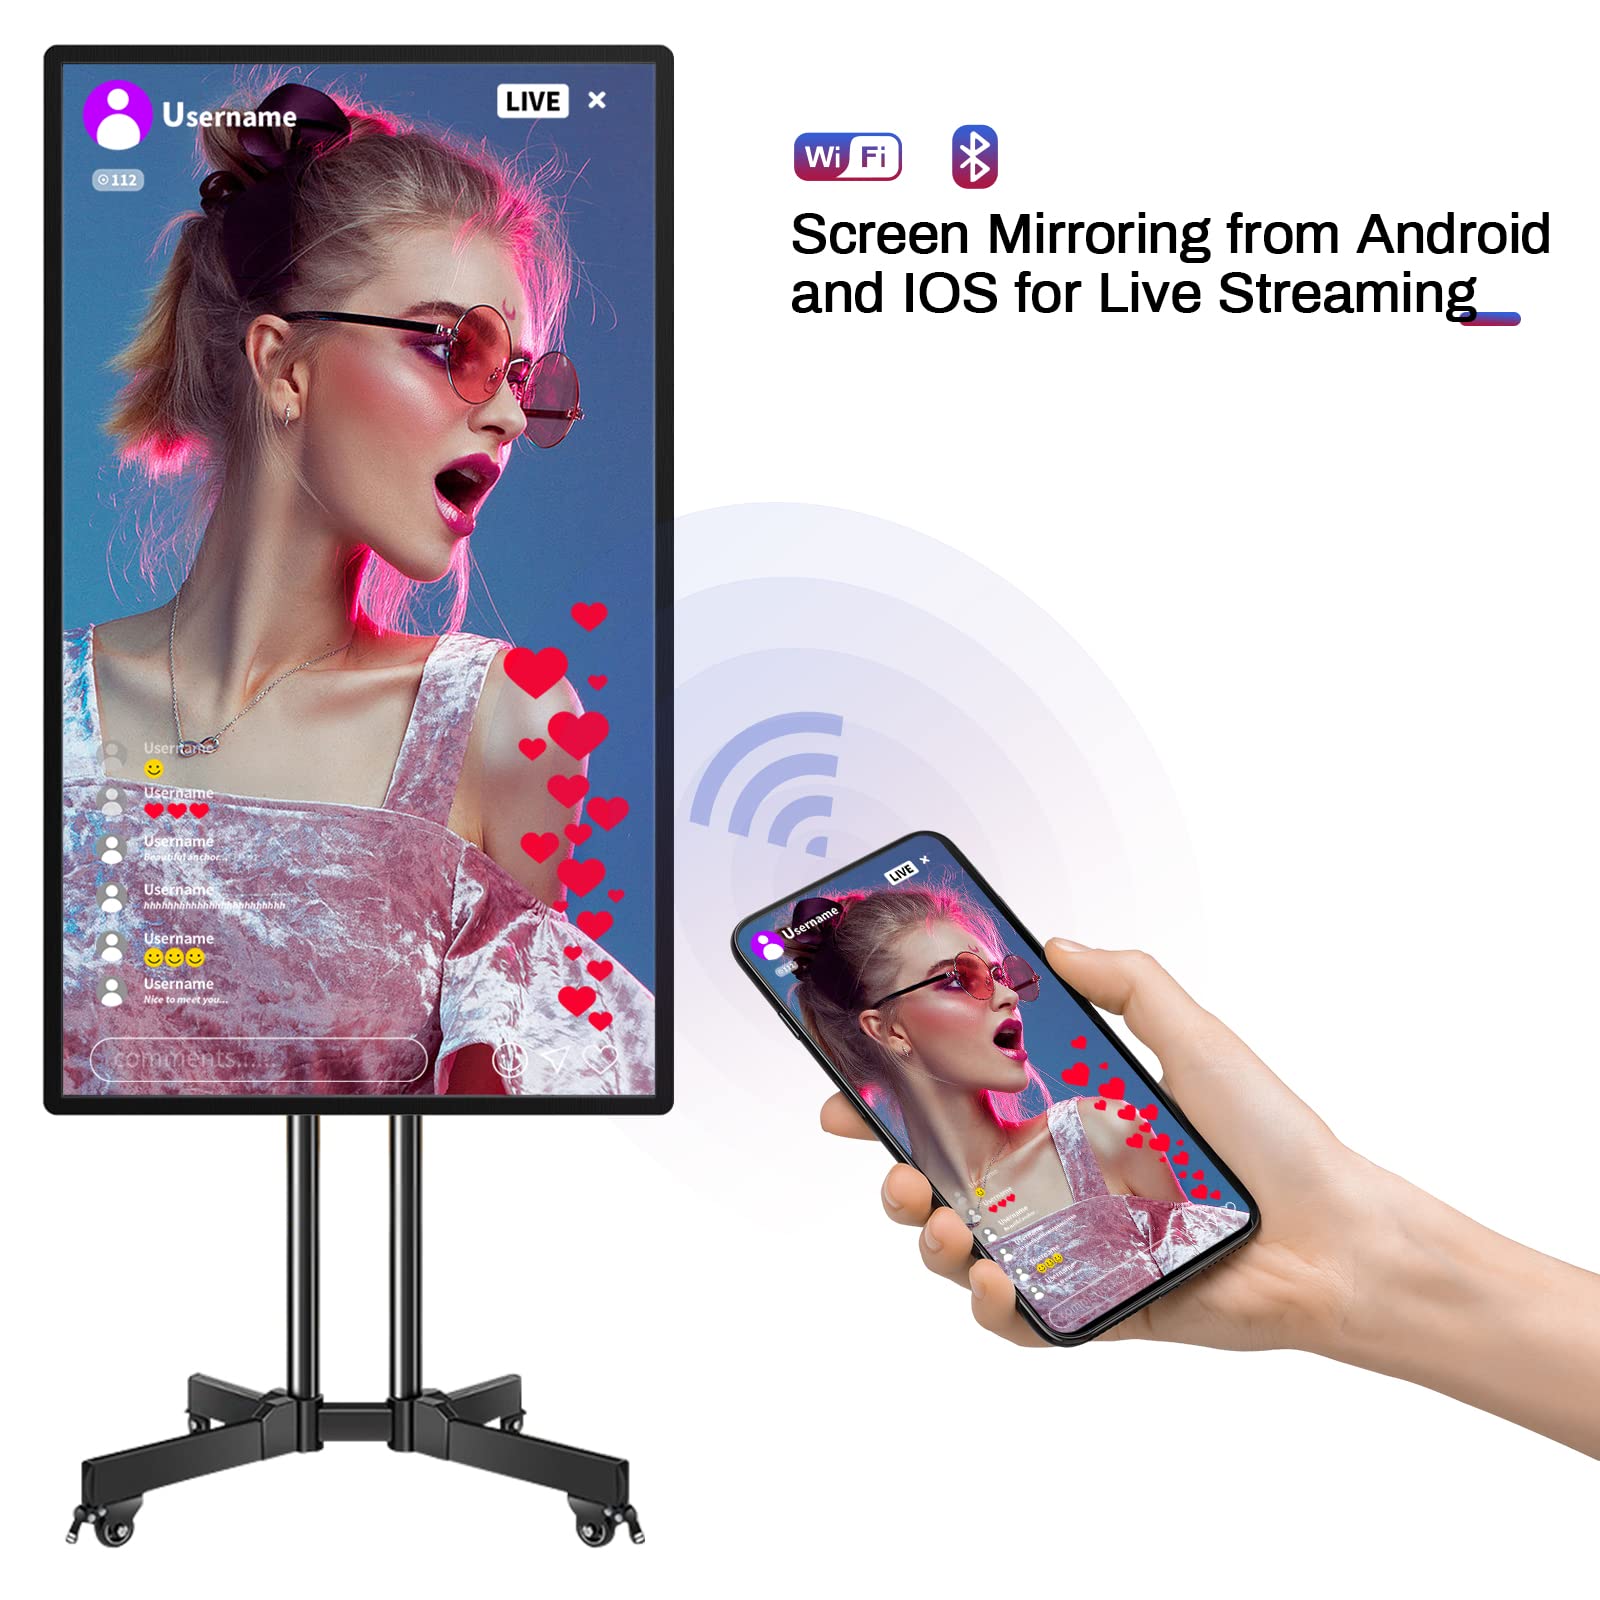 JYXOIHUB Smart Board, 49 Inch Digital Electronic Whiteboard and Smartboard for Classroom, Screen Mirroring from for Live Streaming, Digital Signage Displays and Player for Advertising(Board Only)